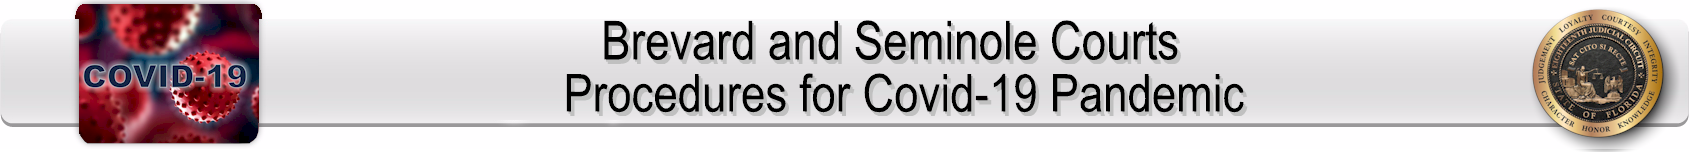 Brevard and Seminole Courts Procedures for COVID-19 Page Banner